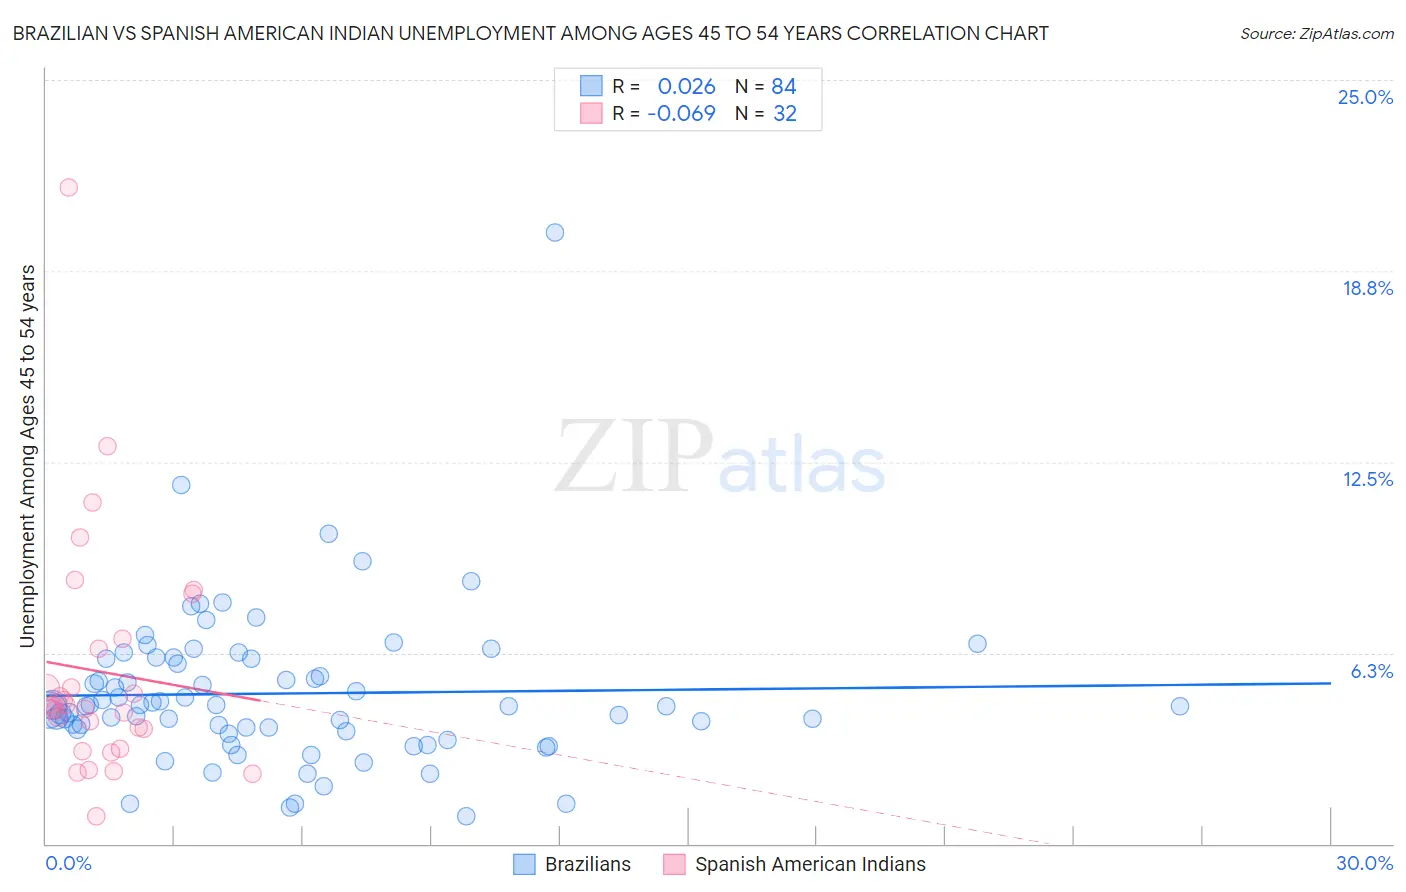 Brazilian vs Spanish American Indian Unemployment Among Ages 45 to 54 years